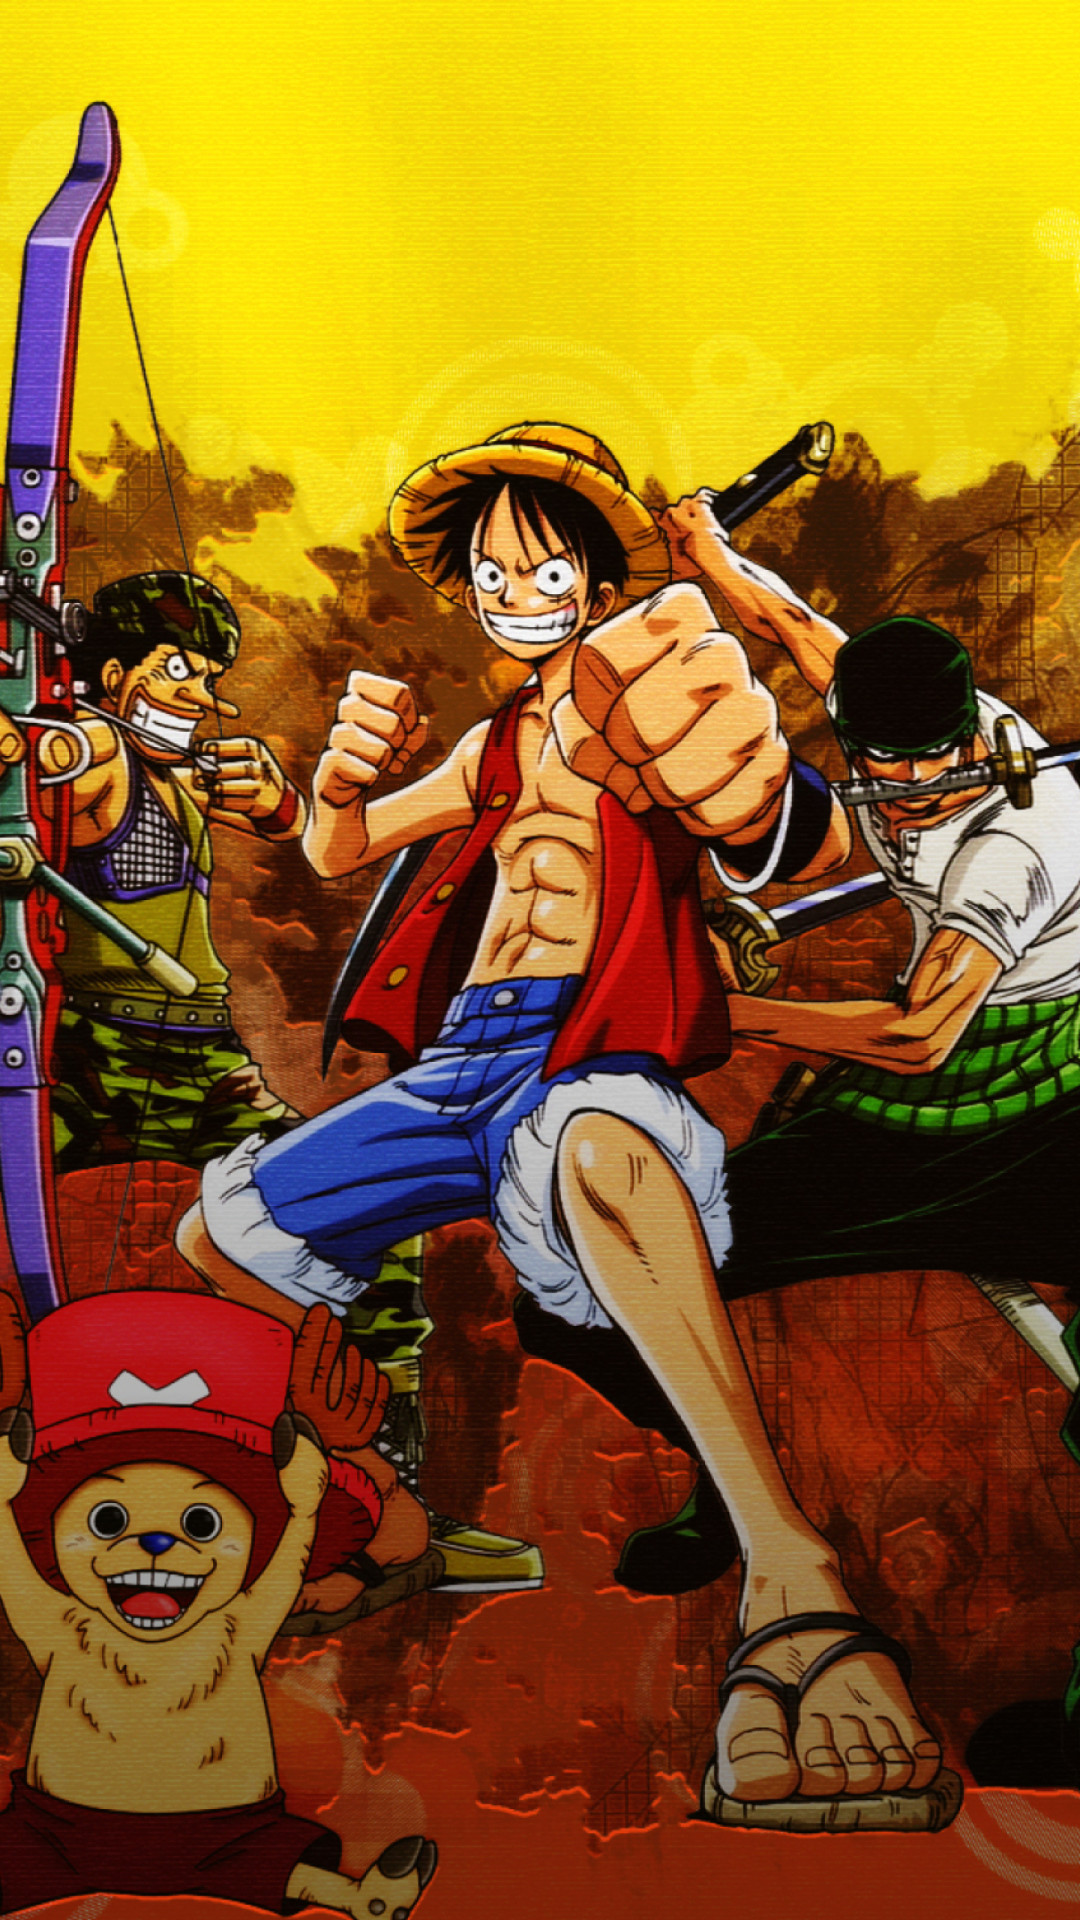 1080x1920 Free One Piece Iphone Wallpaper Download.